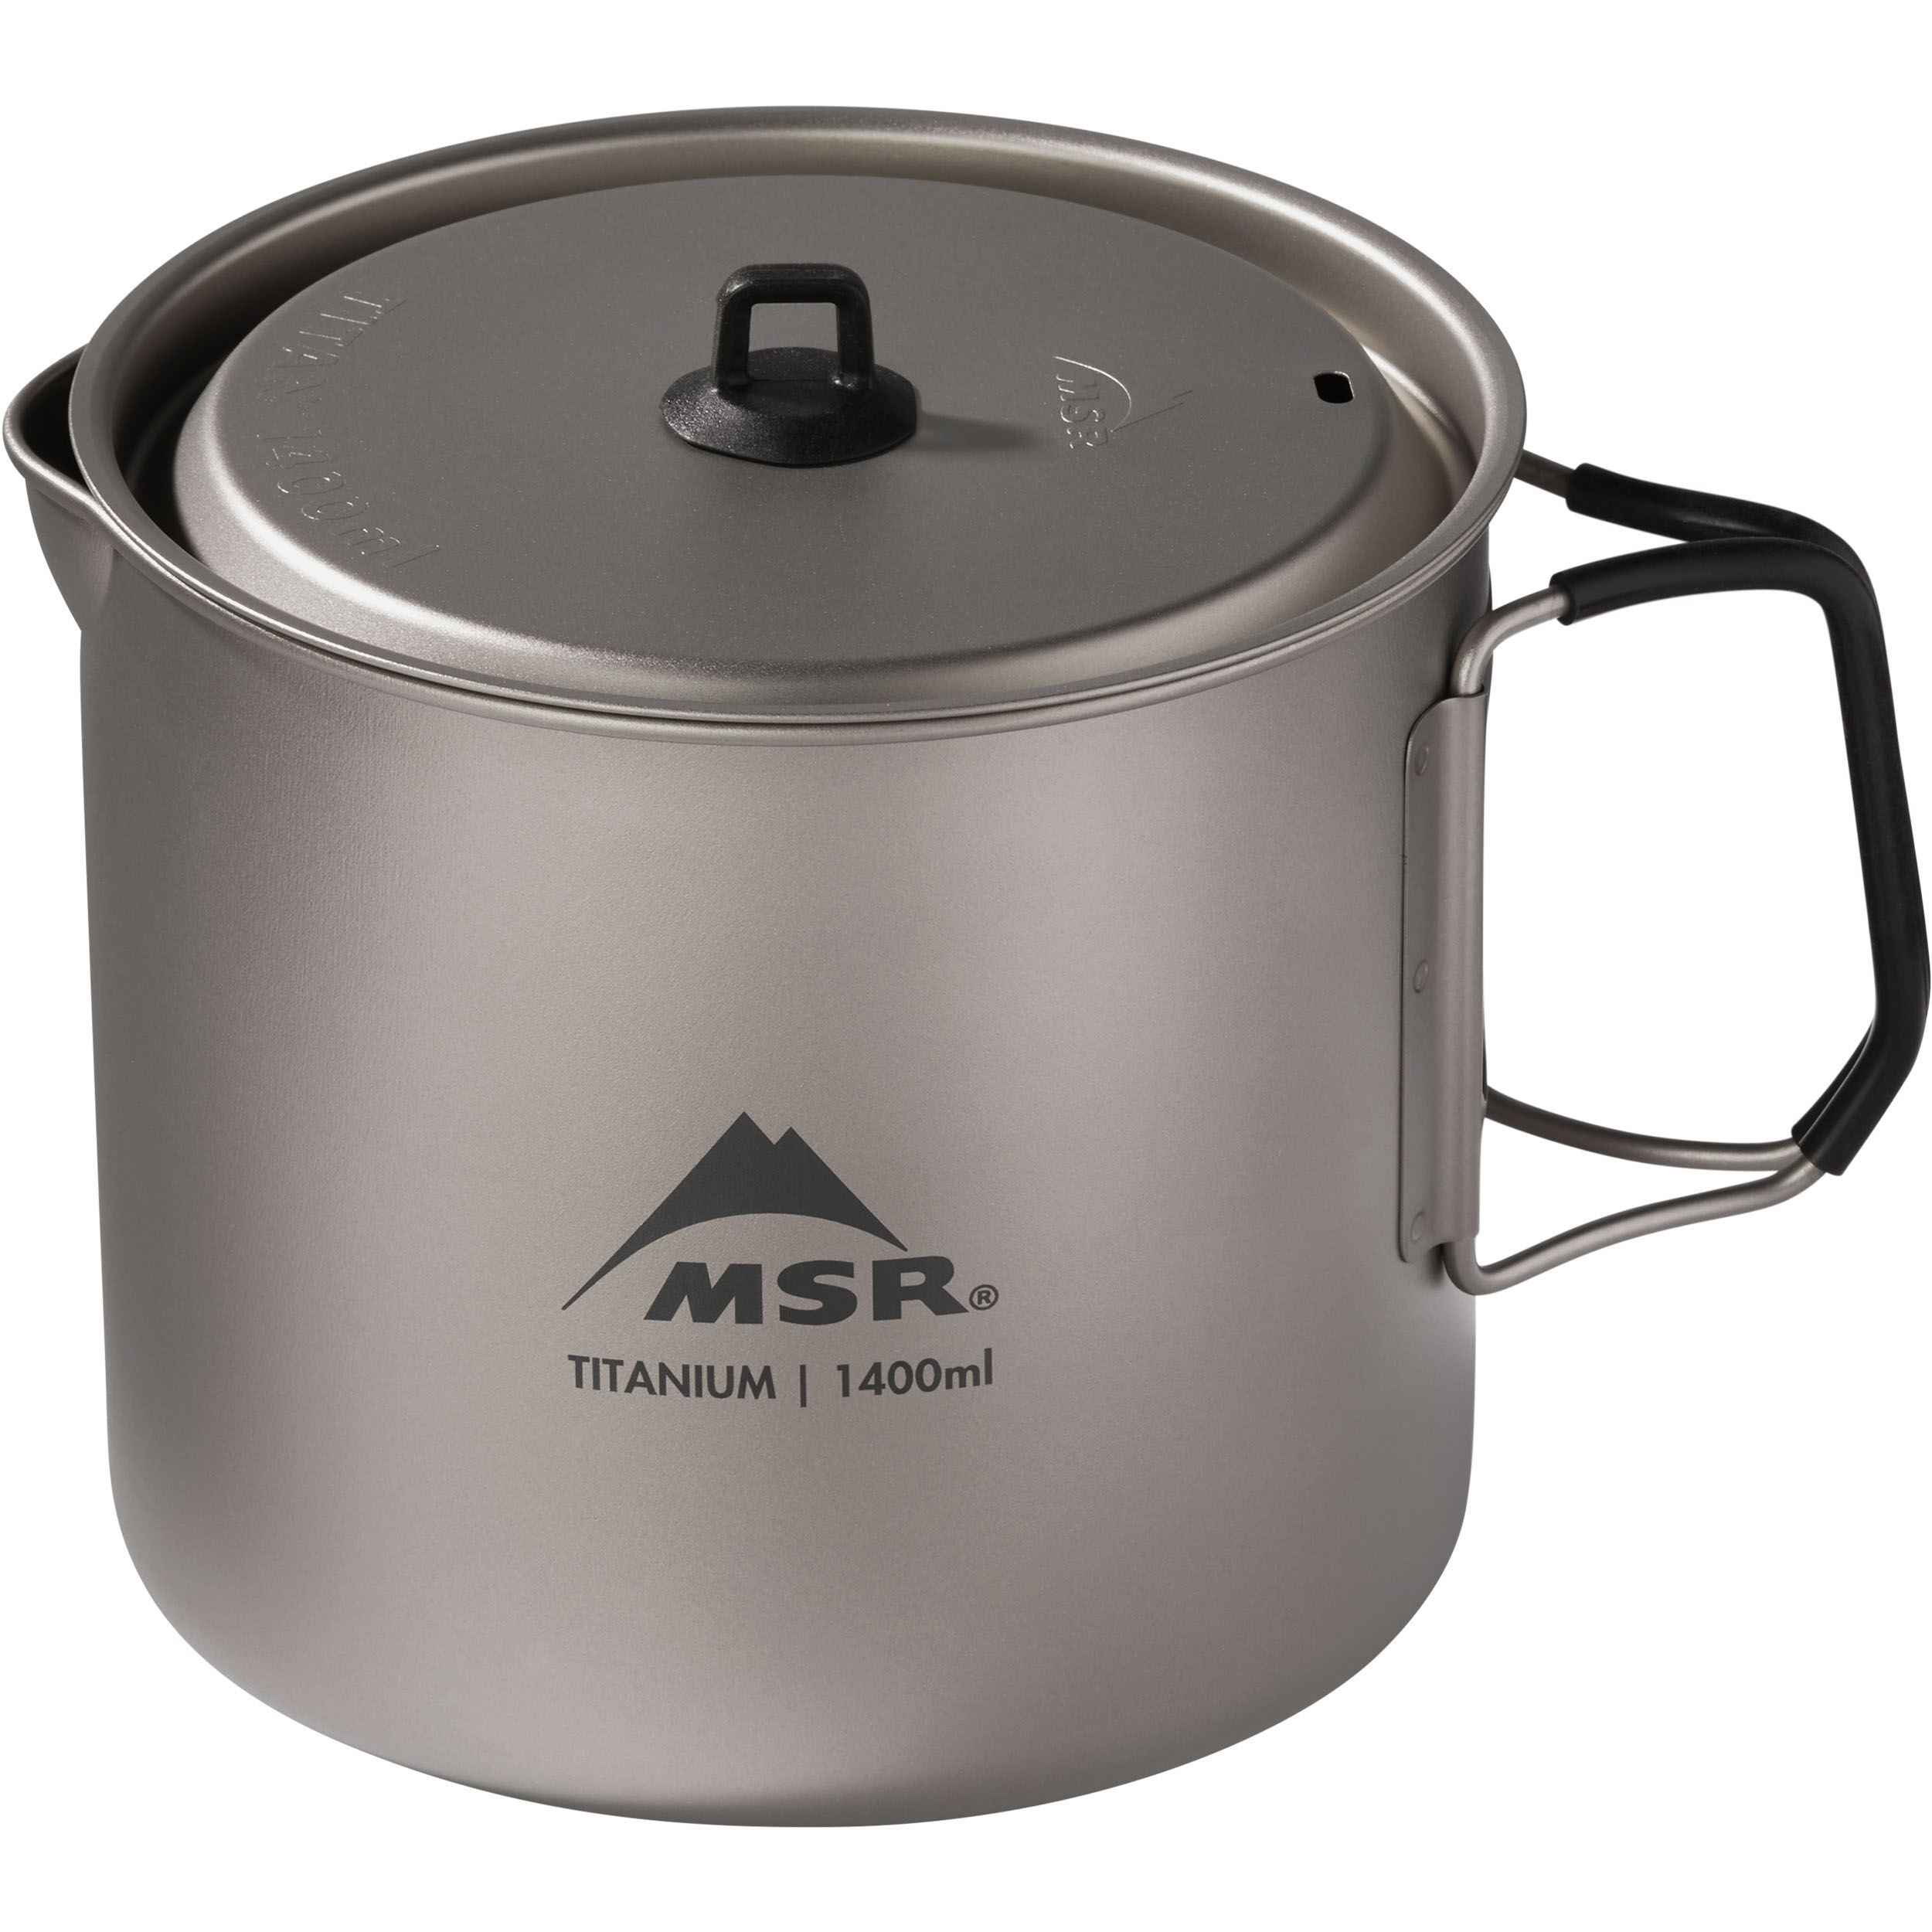 Titanium Camping Cookware | Backpacking & Camping | MSR®